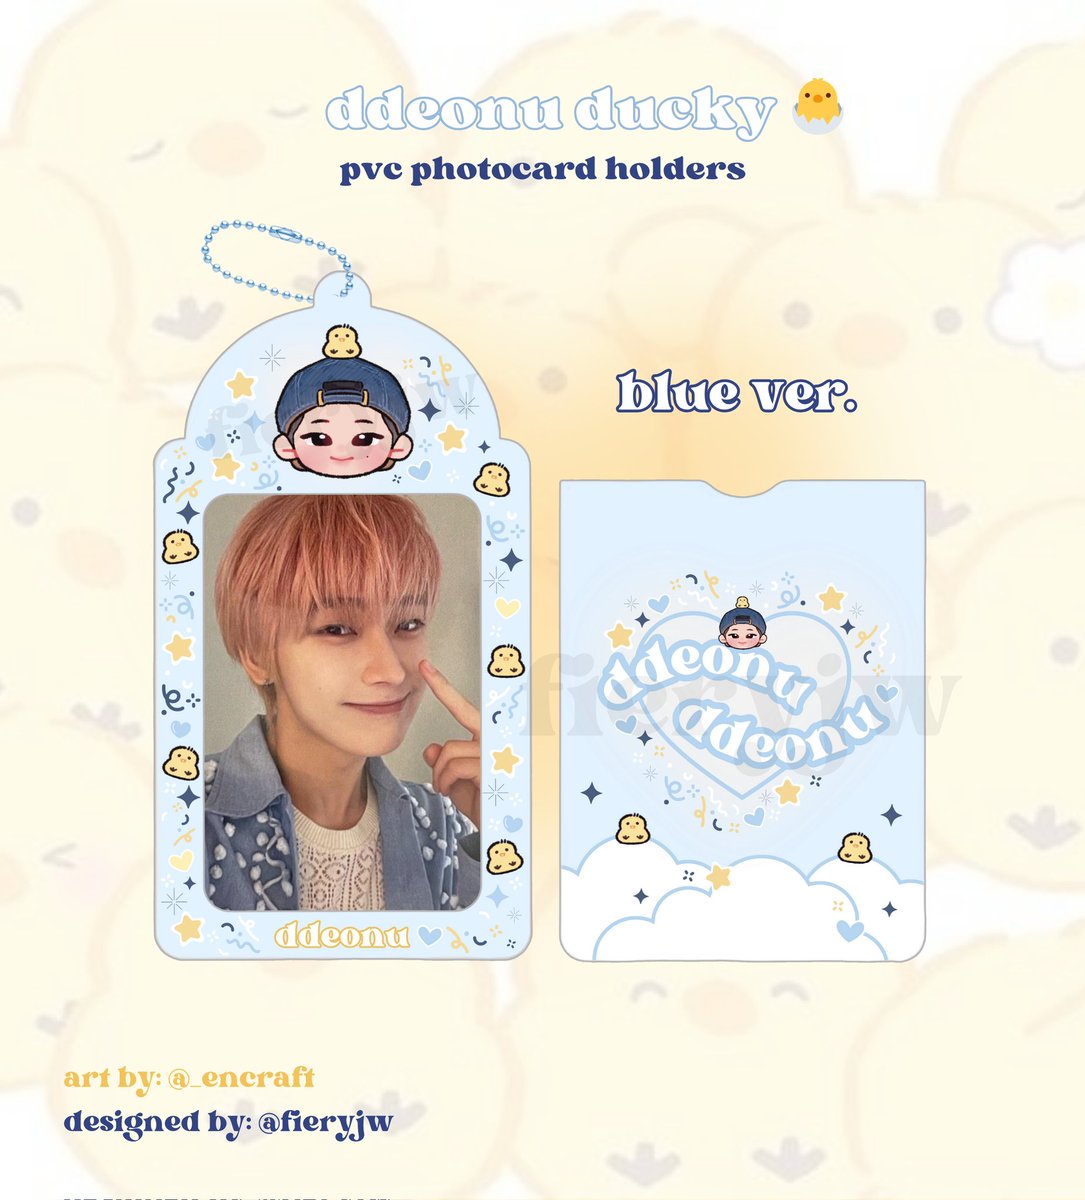 𝙙𝙙𝙚𝙤𝙣𝙪 𝙙𝙪𝙘𝙠𝙮 : photocard holders 🐣💙

𖤐 PRE-ORDER

       - 180 PHP ea
       - first 10 gift: 𝑨𝑪𝑹𝒀𝑳𝑰𝑪 𝑪𝑯𝑨𝑹𝑴

⋆ order form: tinyurl.com/caholsbyfieryjw

𝑹𝑻 𝑳𝑶𝑻𝑻𝑬𝑹𝒀 = 1 𝑾𝑰𝑵𝑵𝑬𝑹 𝑶𝑭 𝑪𝑨𝑯𝑶𝑳

t. wts lfb ph pvc pocahol kim sunoo enhypen